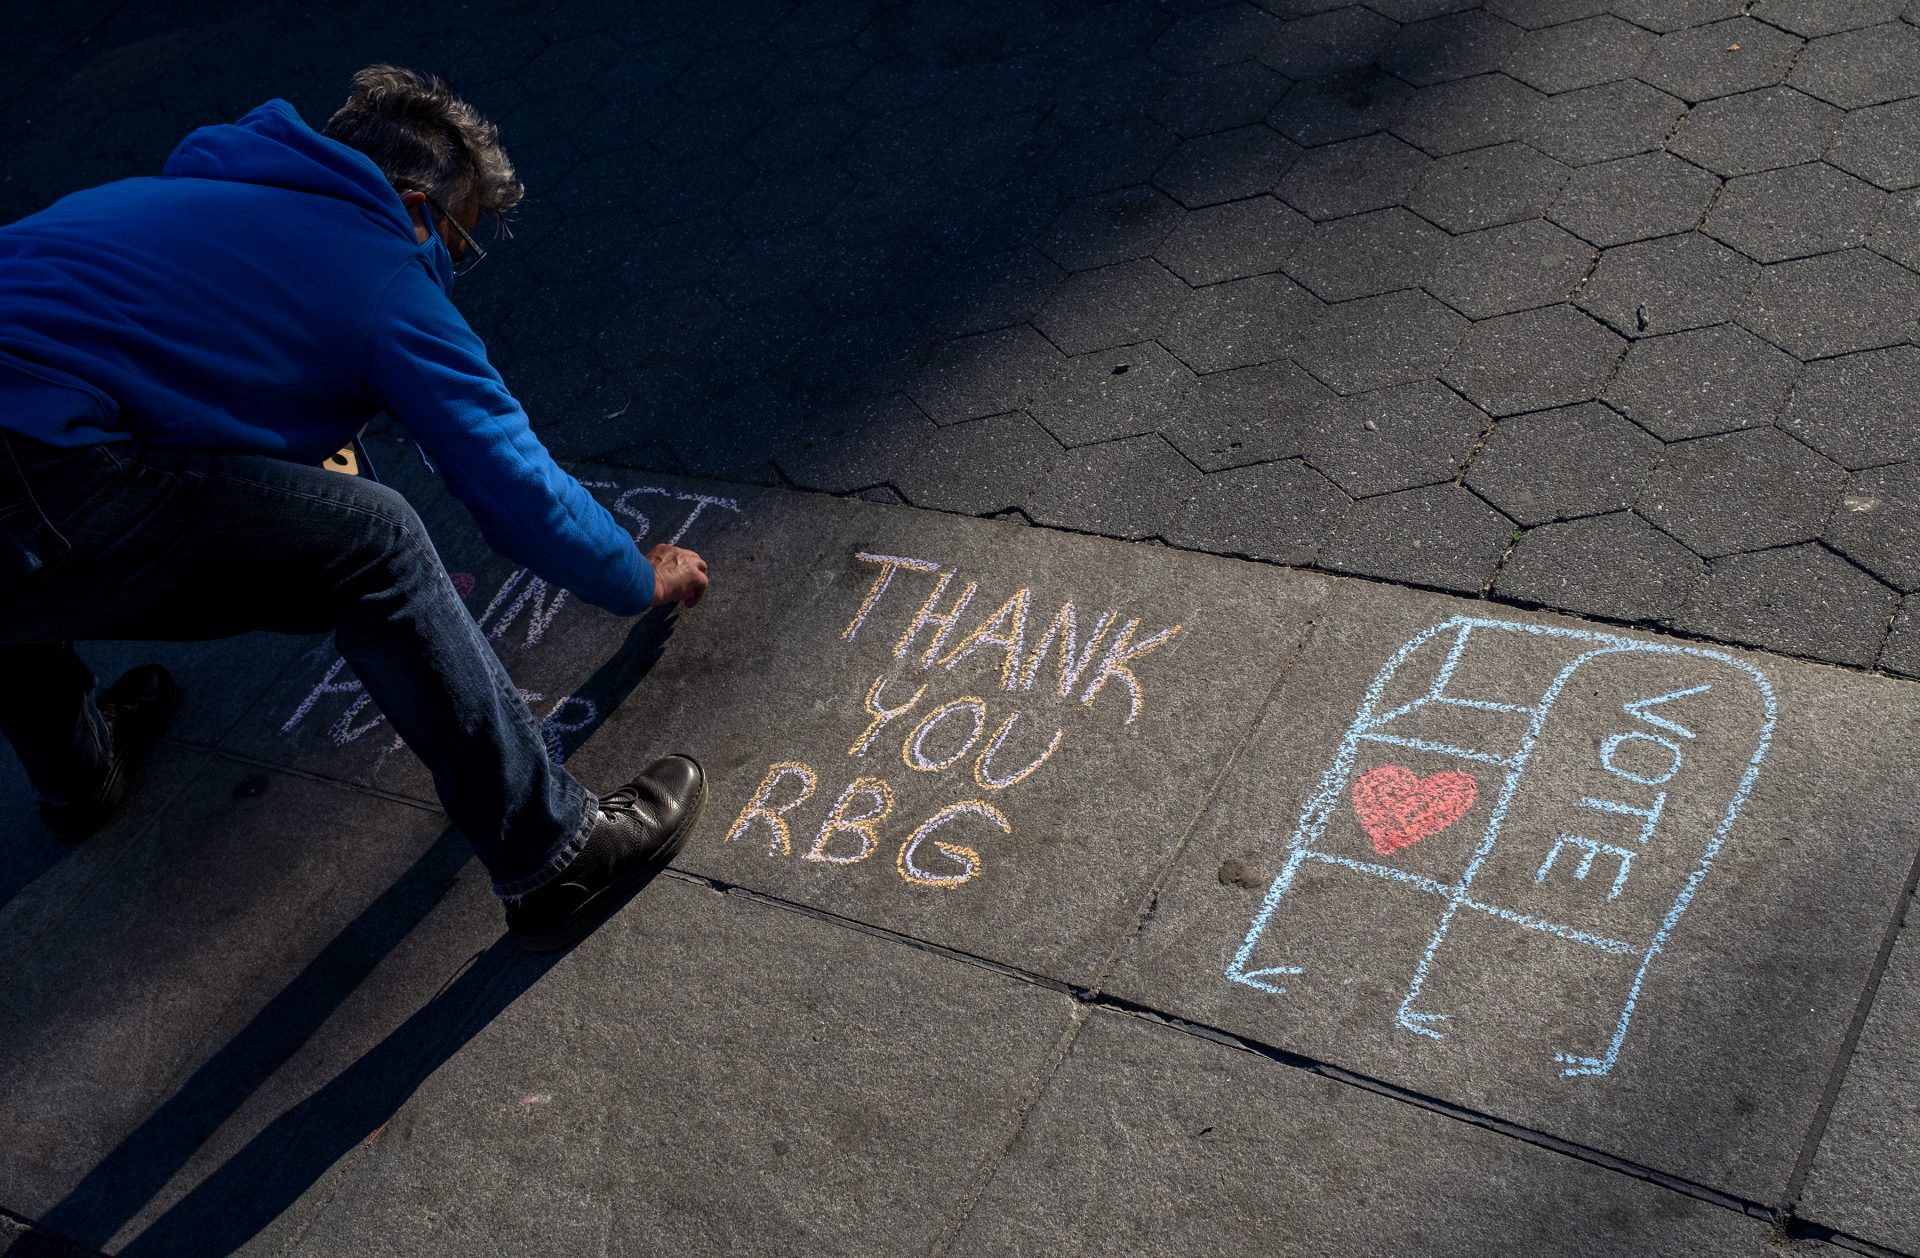 Kimberly Miller, of the Brooklyn borough of New York, who is with Gays Against Guns, leaves a chalk message honoring Justice Ruth Bader Ginsburg on a Washington Square Park walkway in New York Saturday, Sept. 19, 2020, a day after the death of the Supreme Court justice.